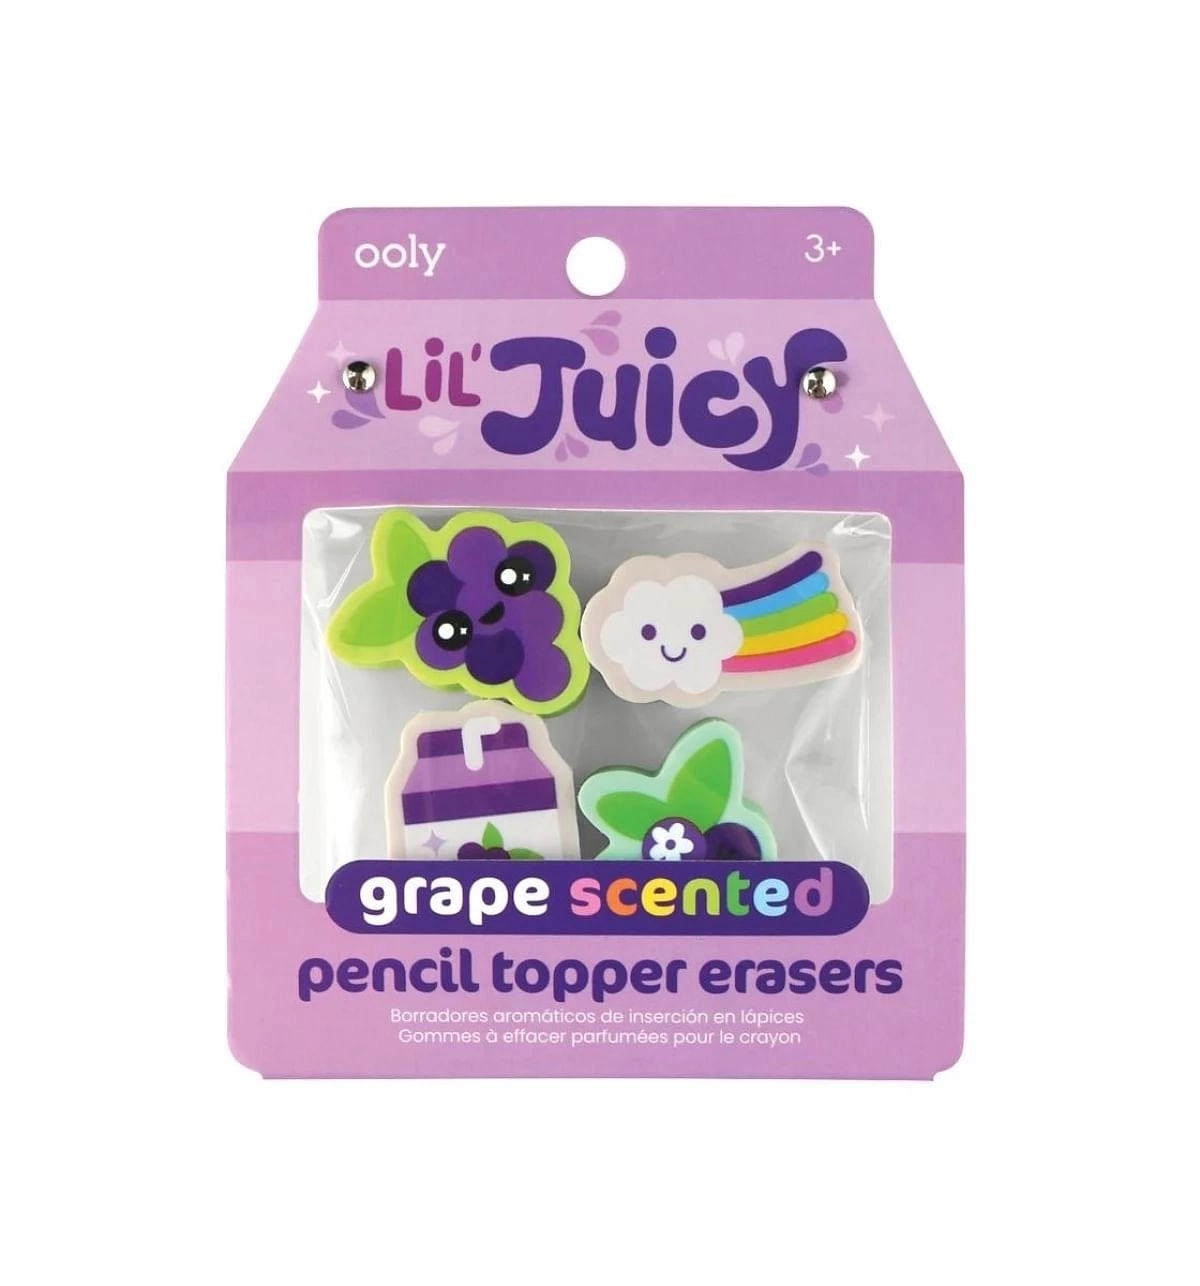 OOLY Lil' Juicy Scented Pencil Topper Eraser, Erasers for Art, School, and Office Use, Classroom Set, Set of 4, Purple, 6Y+